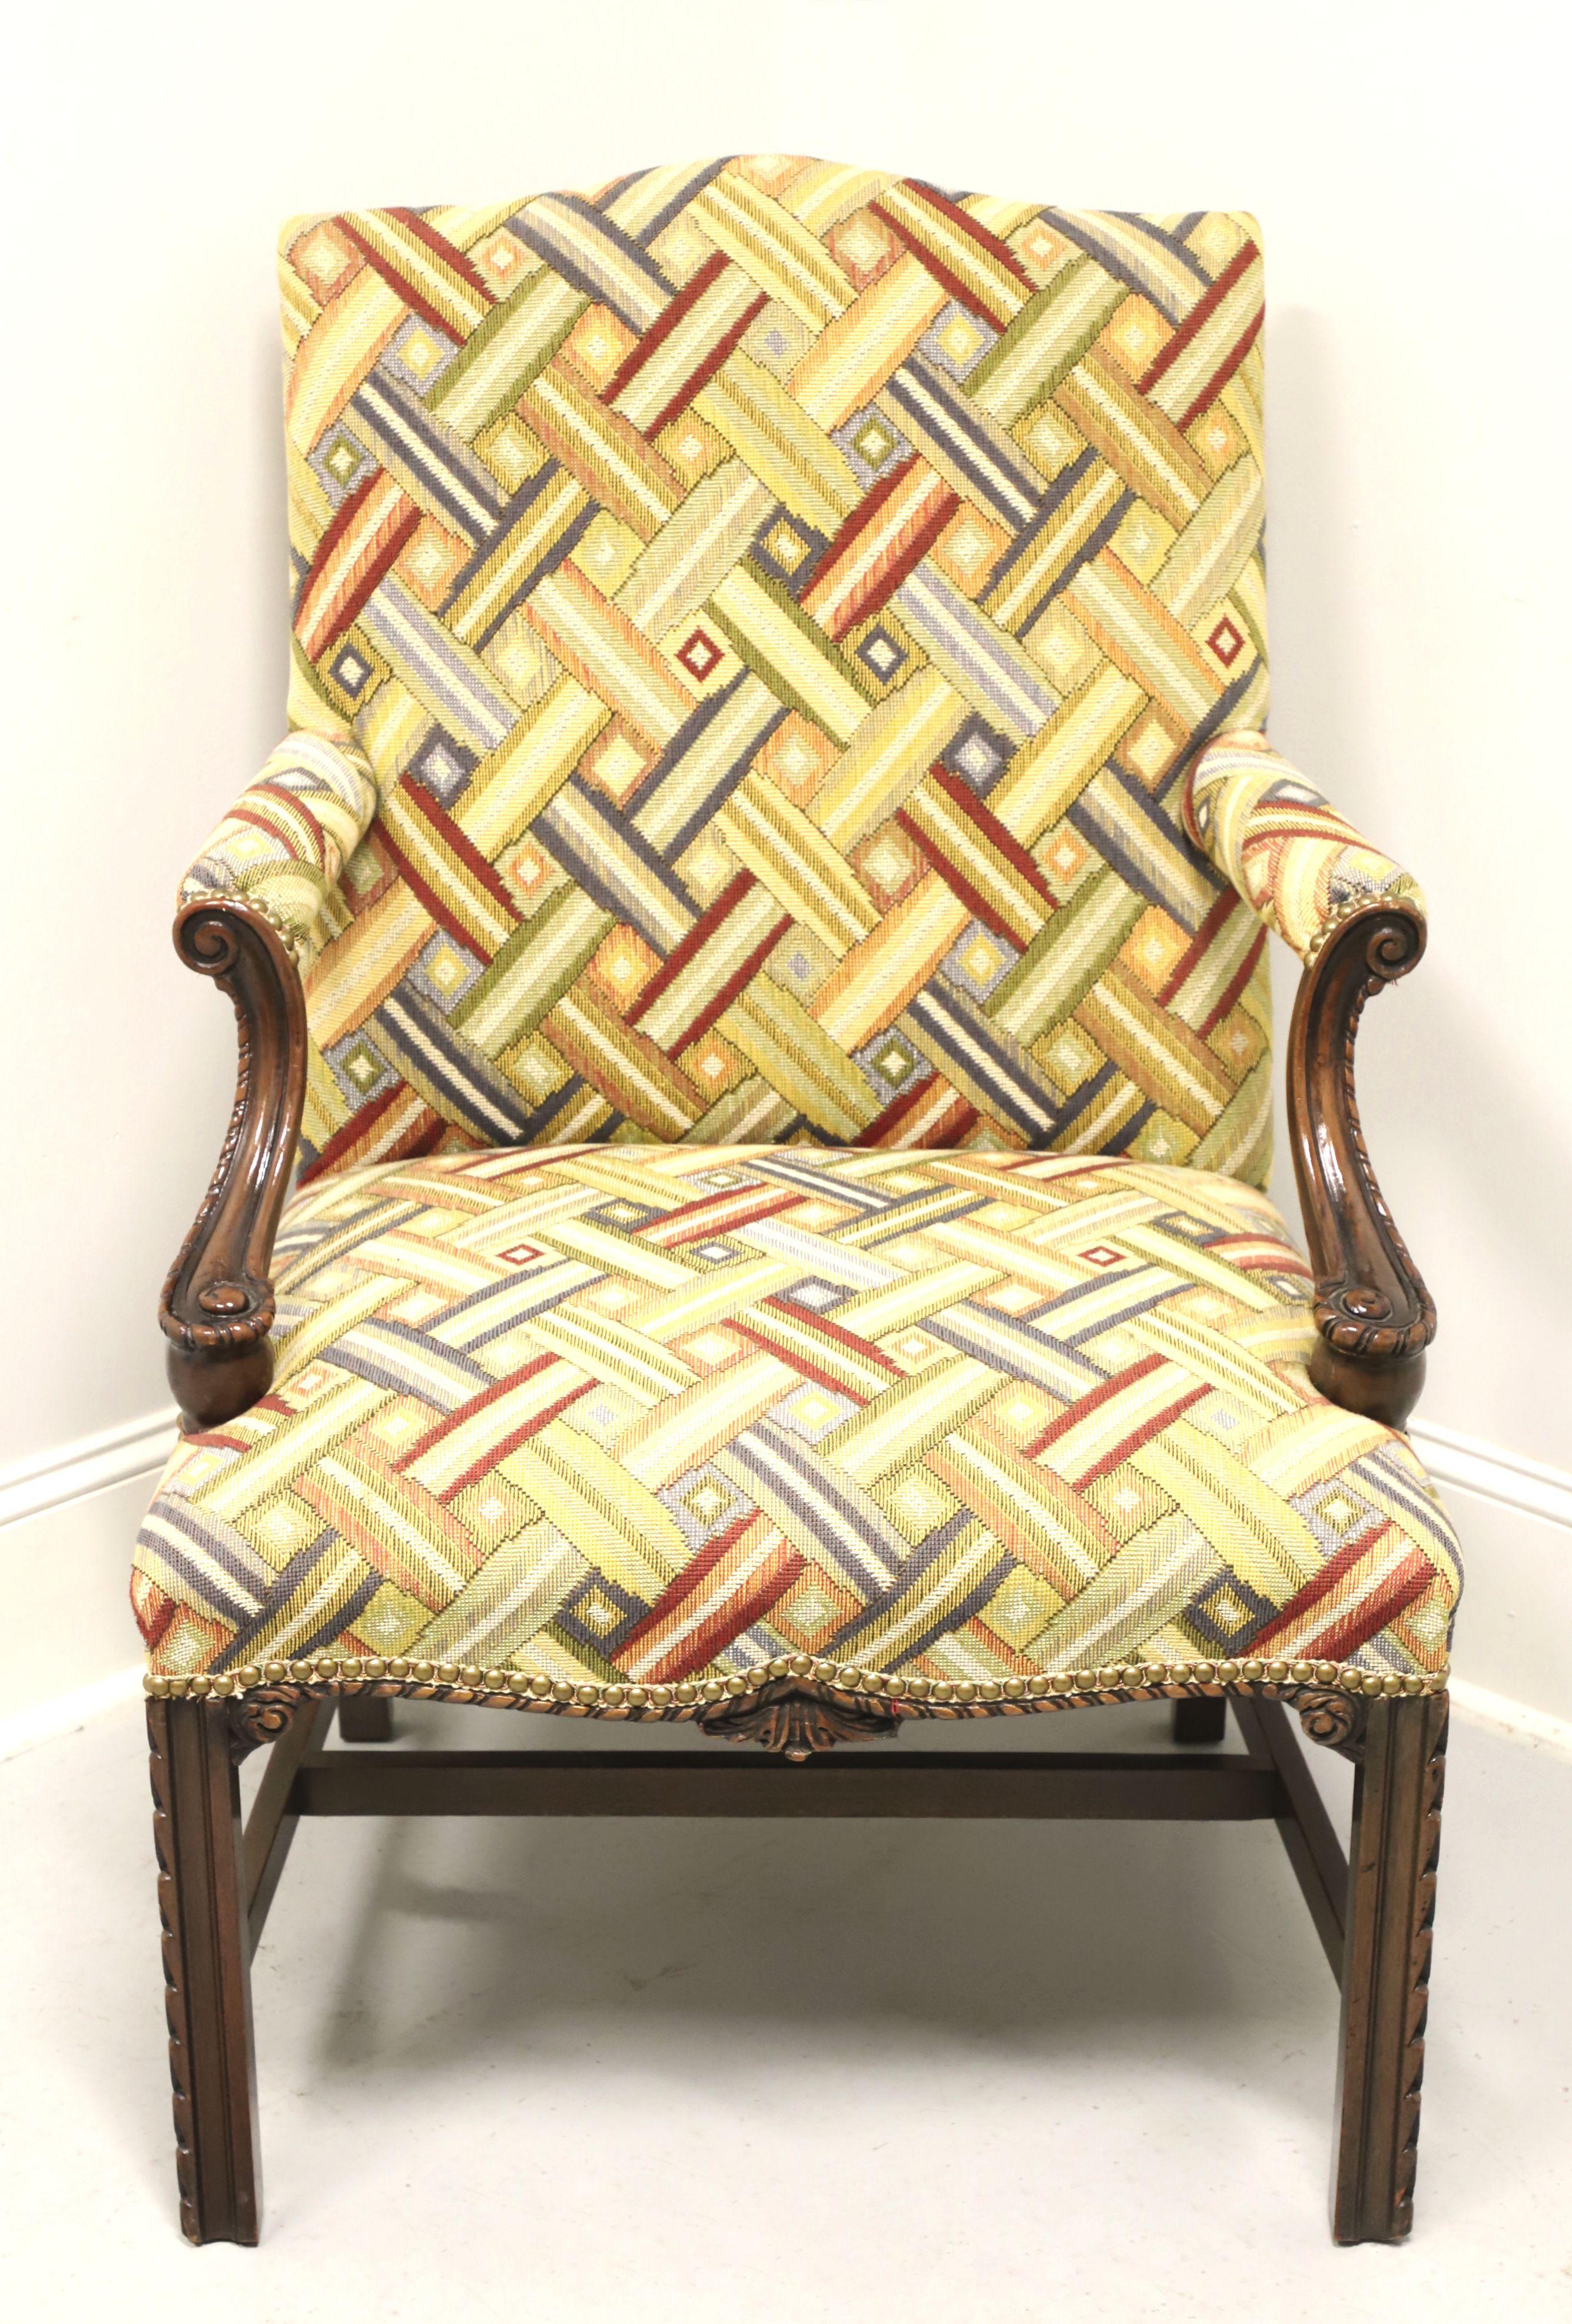 A Chippendale Martha Washington style upholstered armchair, unbranded, similar quality to Drexel or Hickory Chair. Mahogany frame, multi-colored interwoven pattern fabric upholstery, high back, upholstered arms with carved mahogany supports, brass